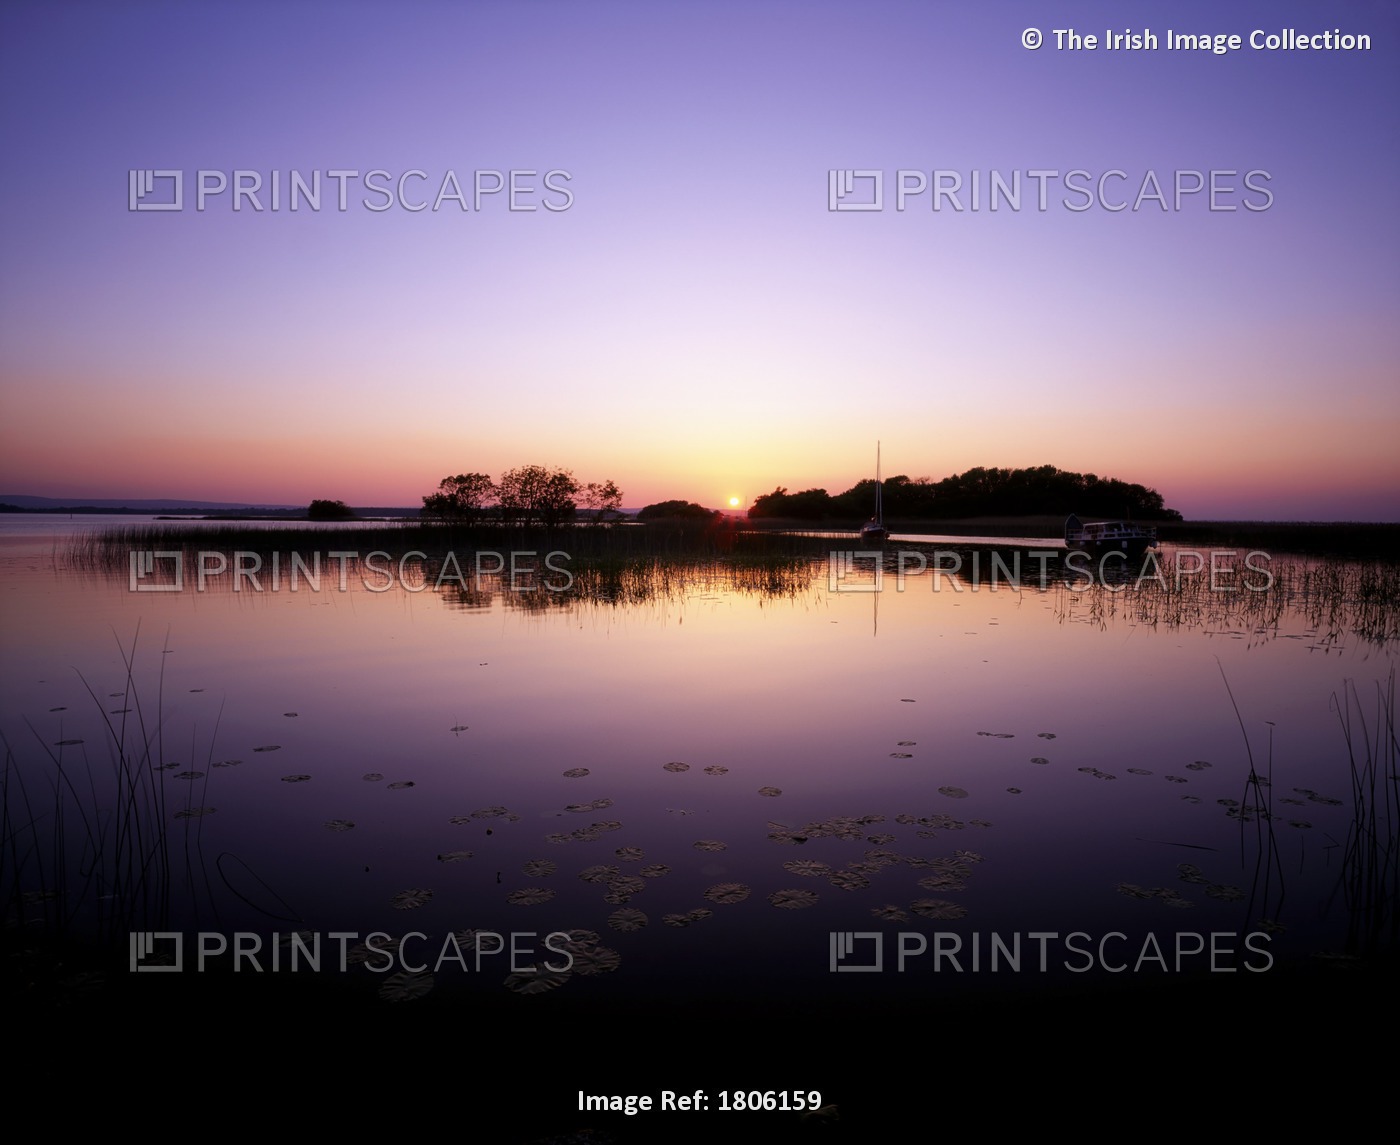 Sunset Over Small Island In Lake; Lough Derg, Co Tipperary, Ireland